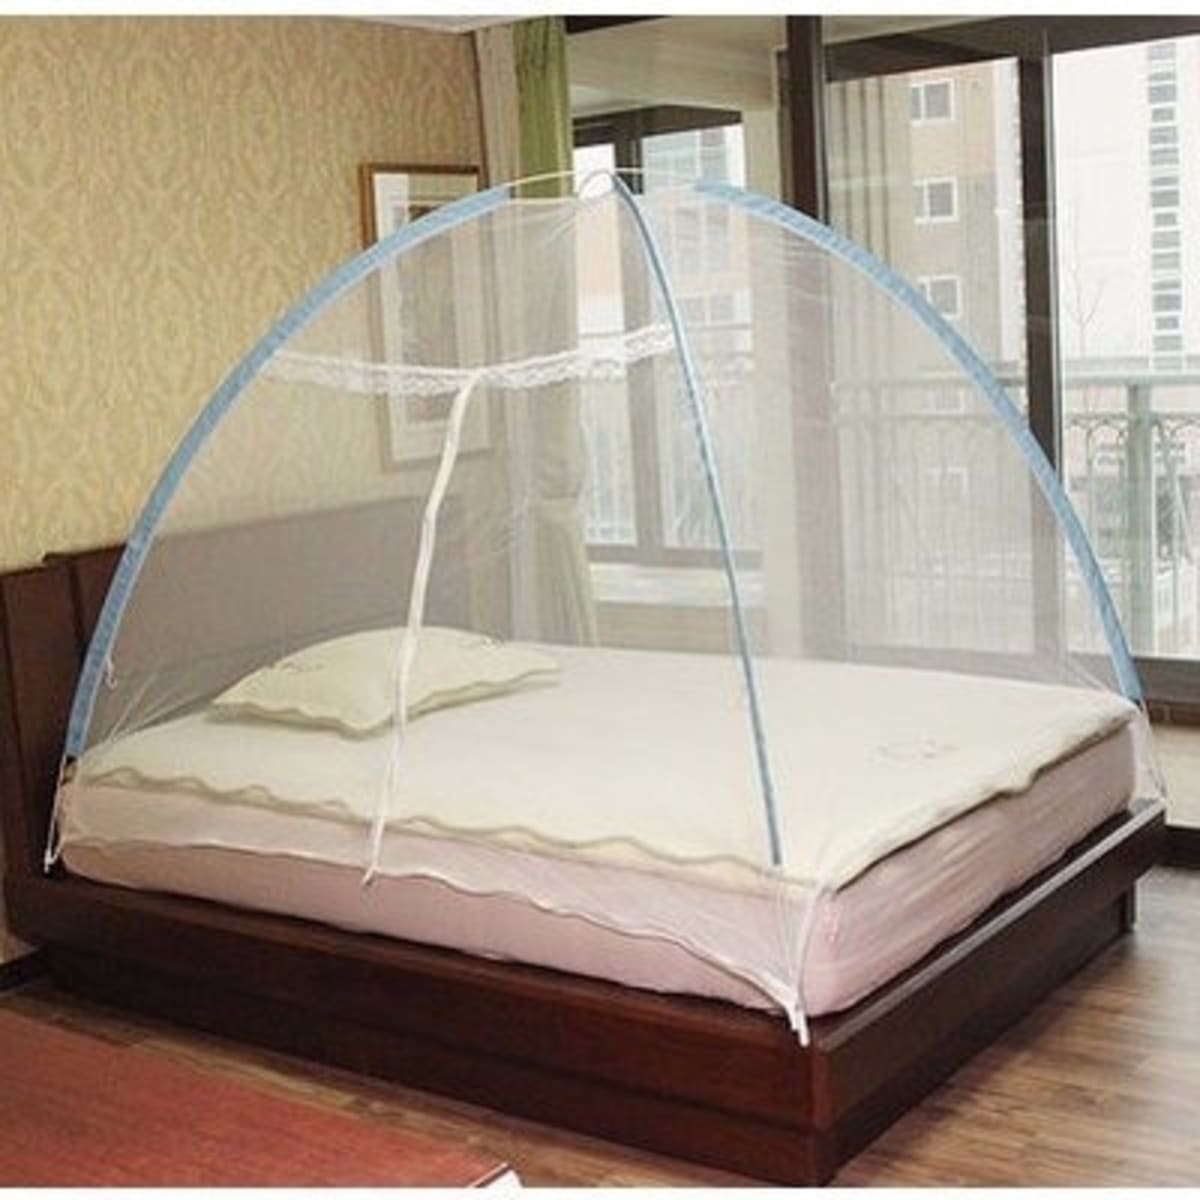 Foldable Mosquito Net Tent - 7x7 ft